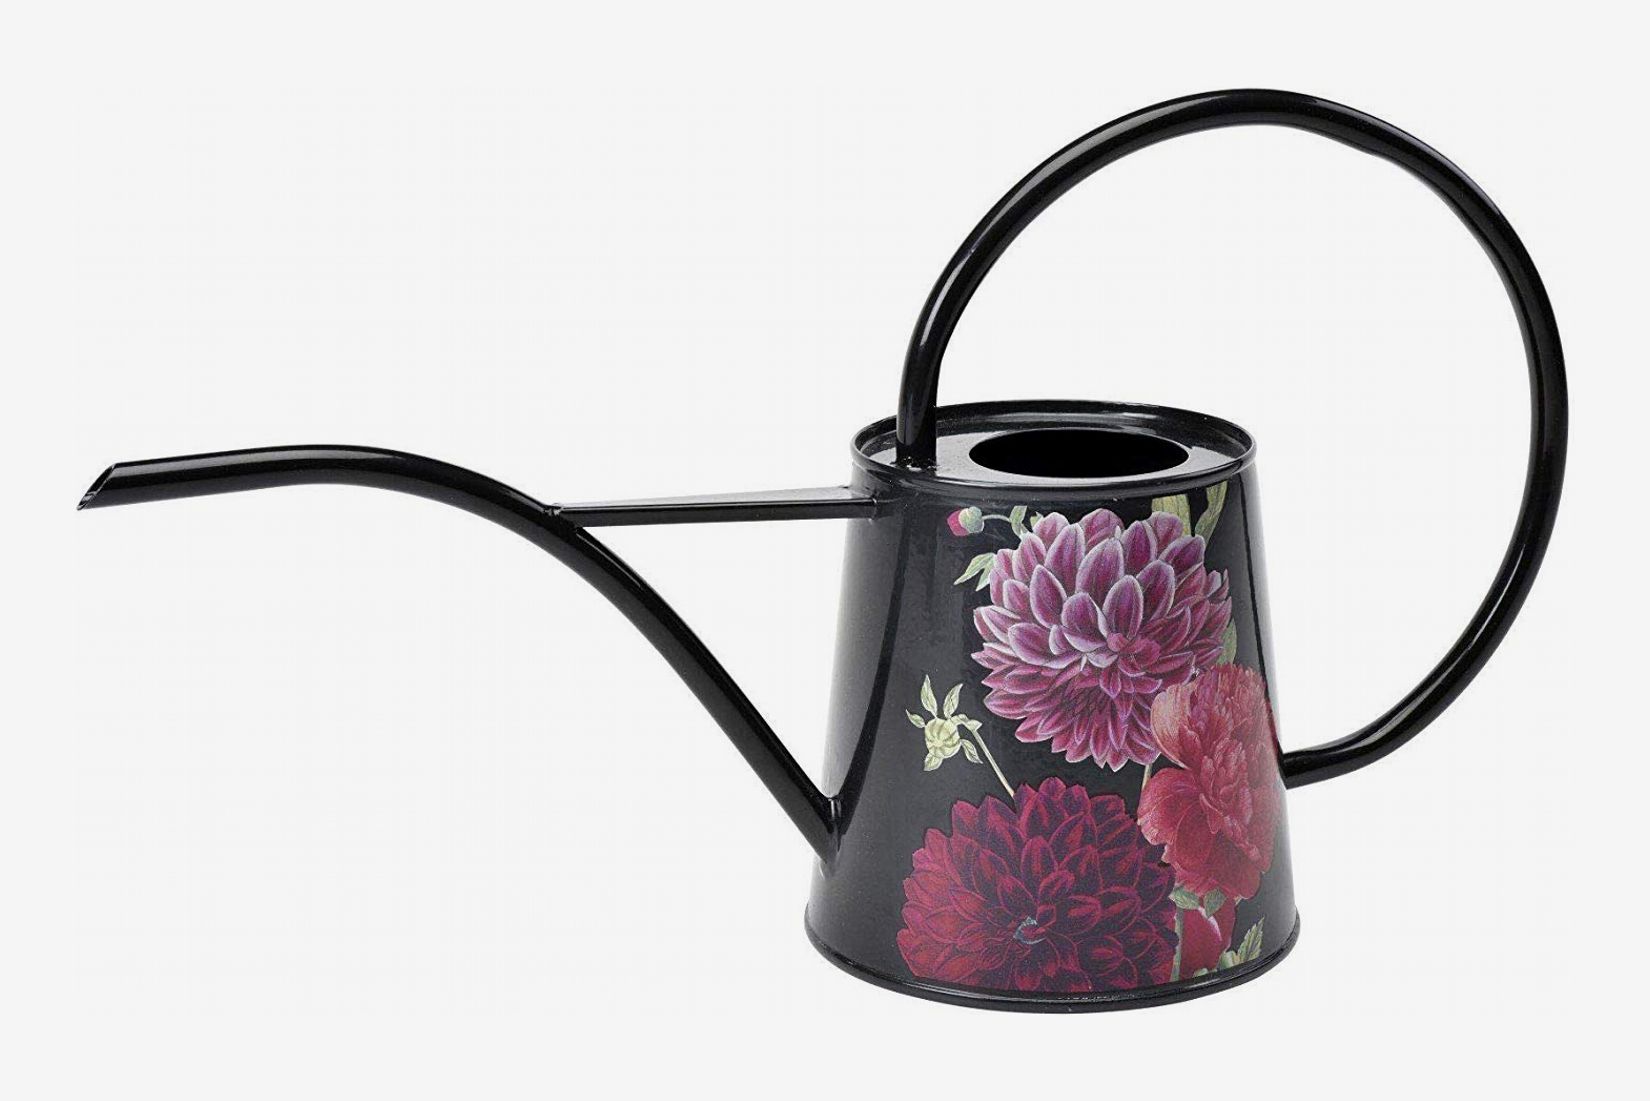 Details about   300-1500ml Stainless Steel Long Spout Watering Pot for Flowers Plants Watering 